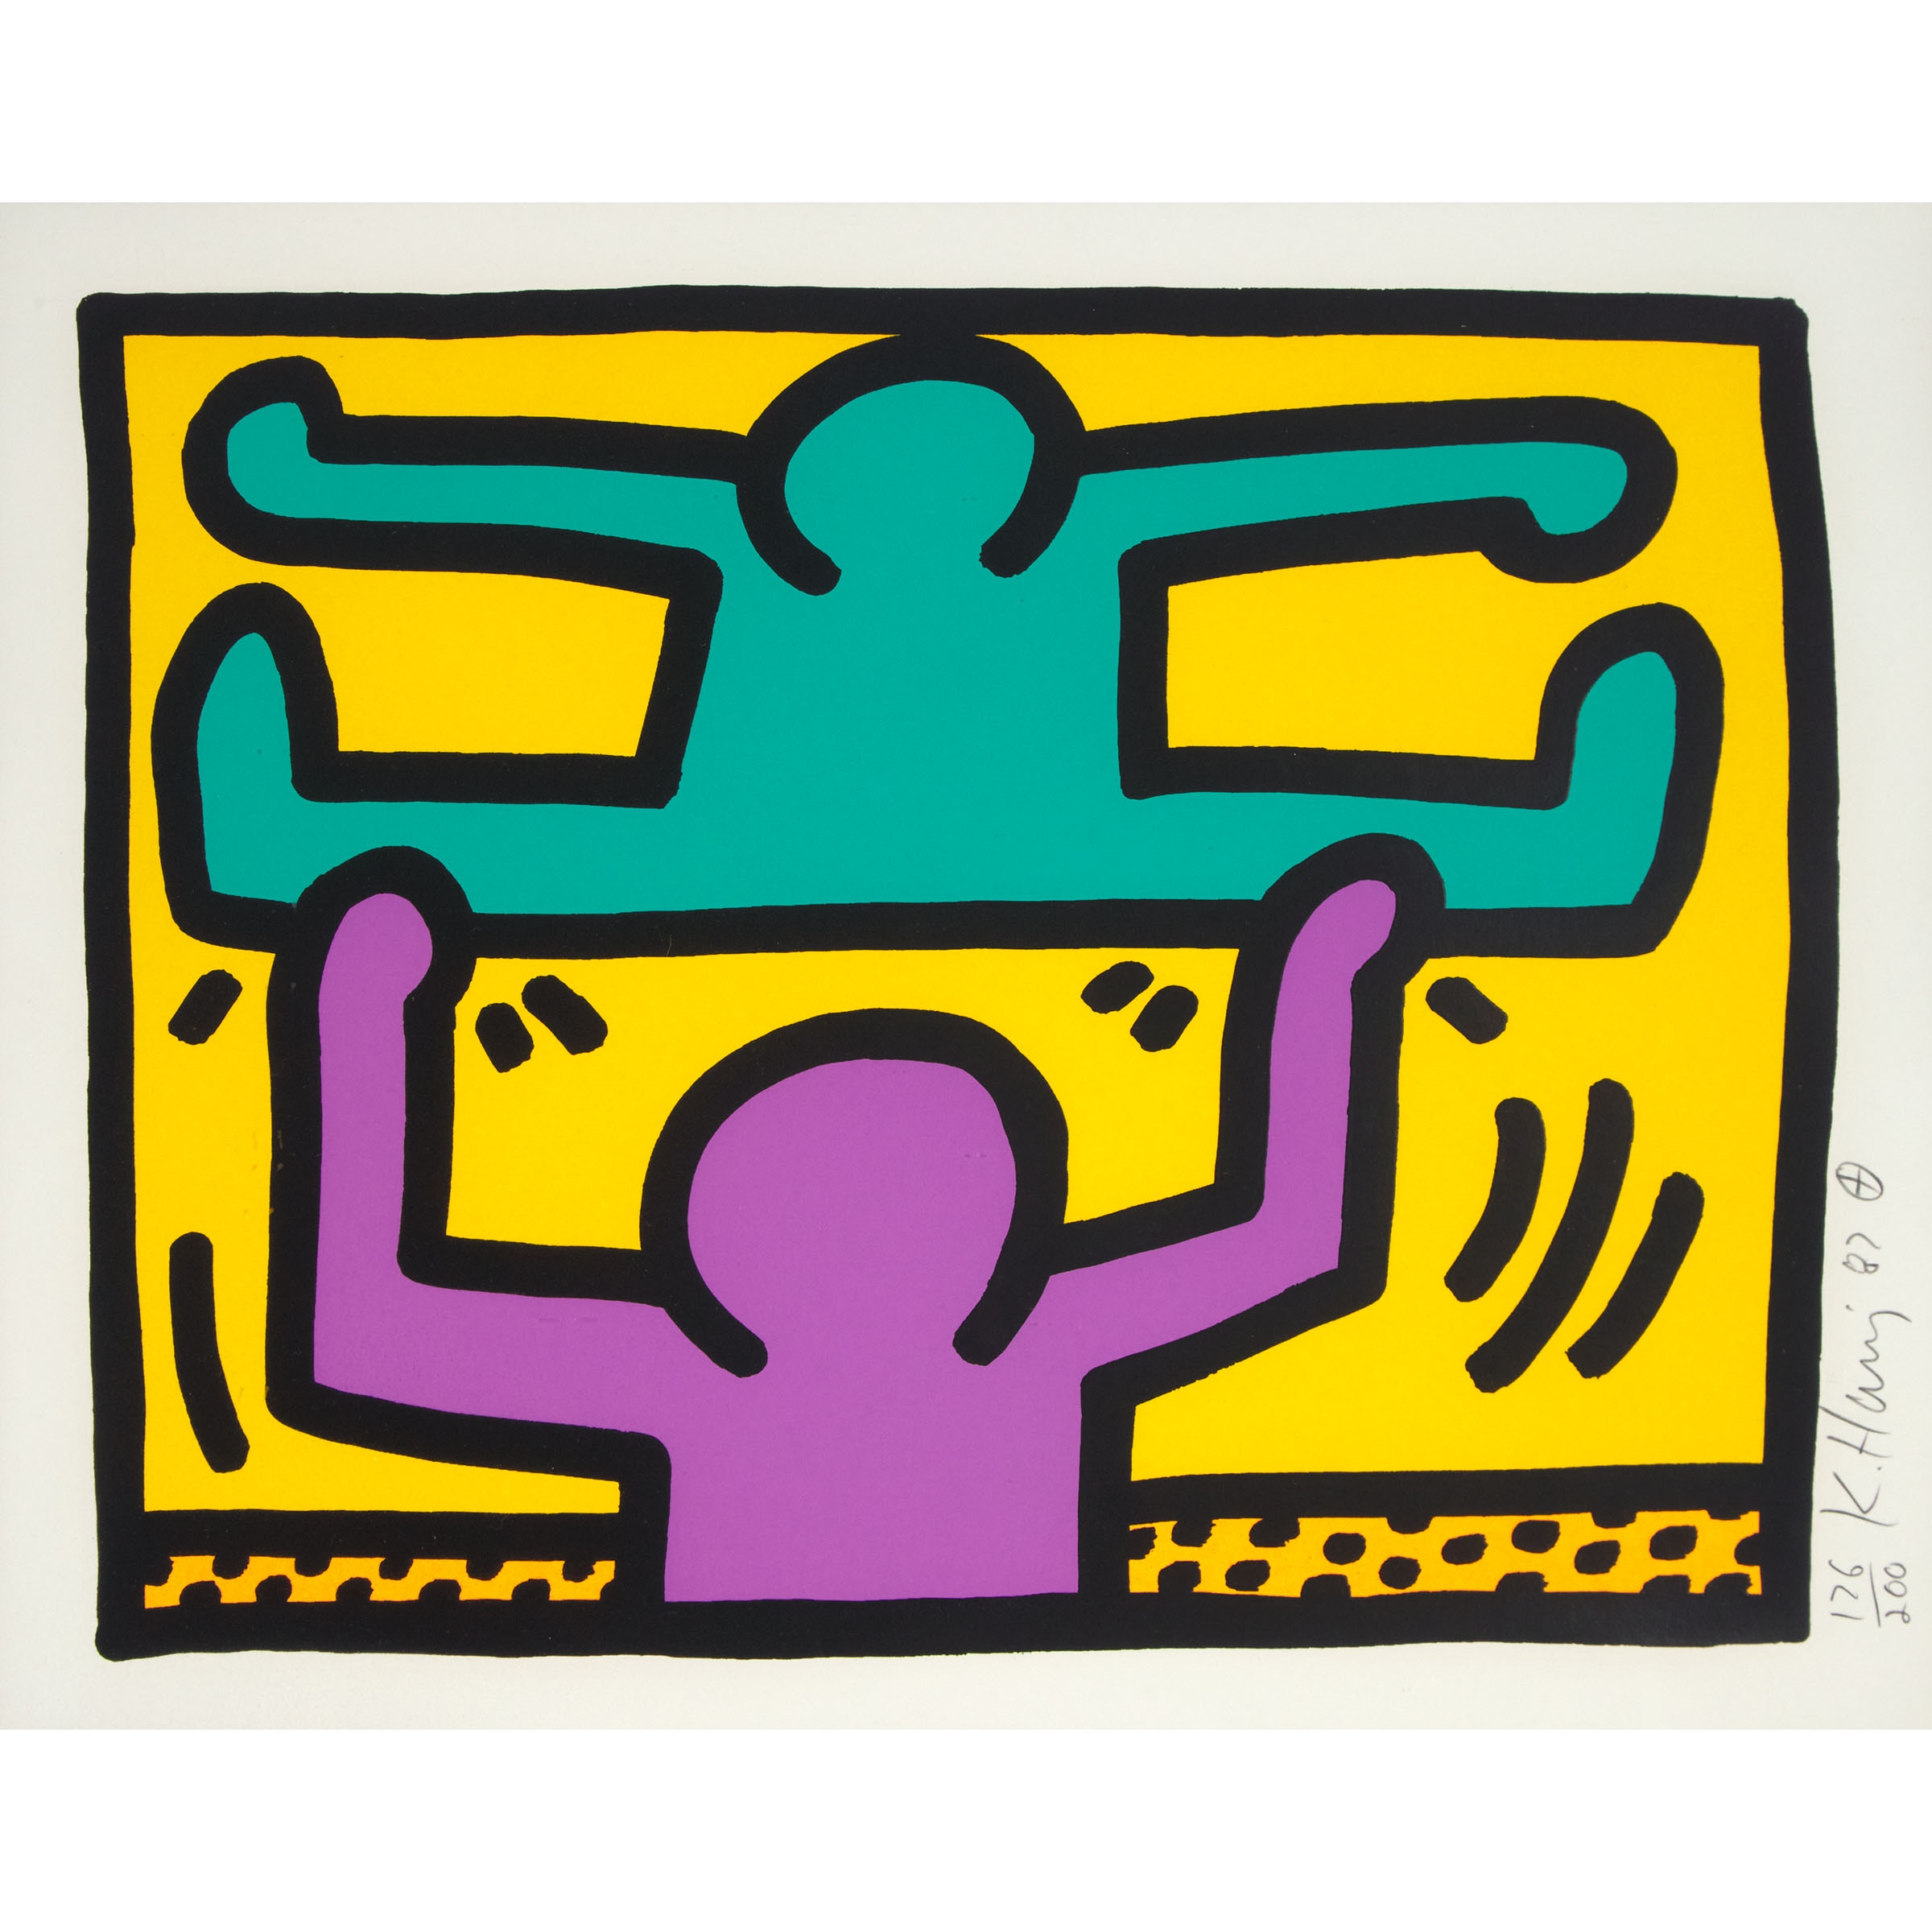 PLATE 4, FROM "POP SHOP I," 1987 - Keith Haring